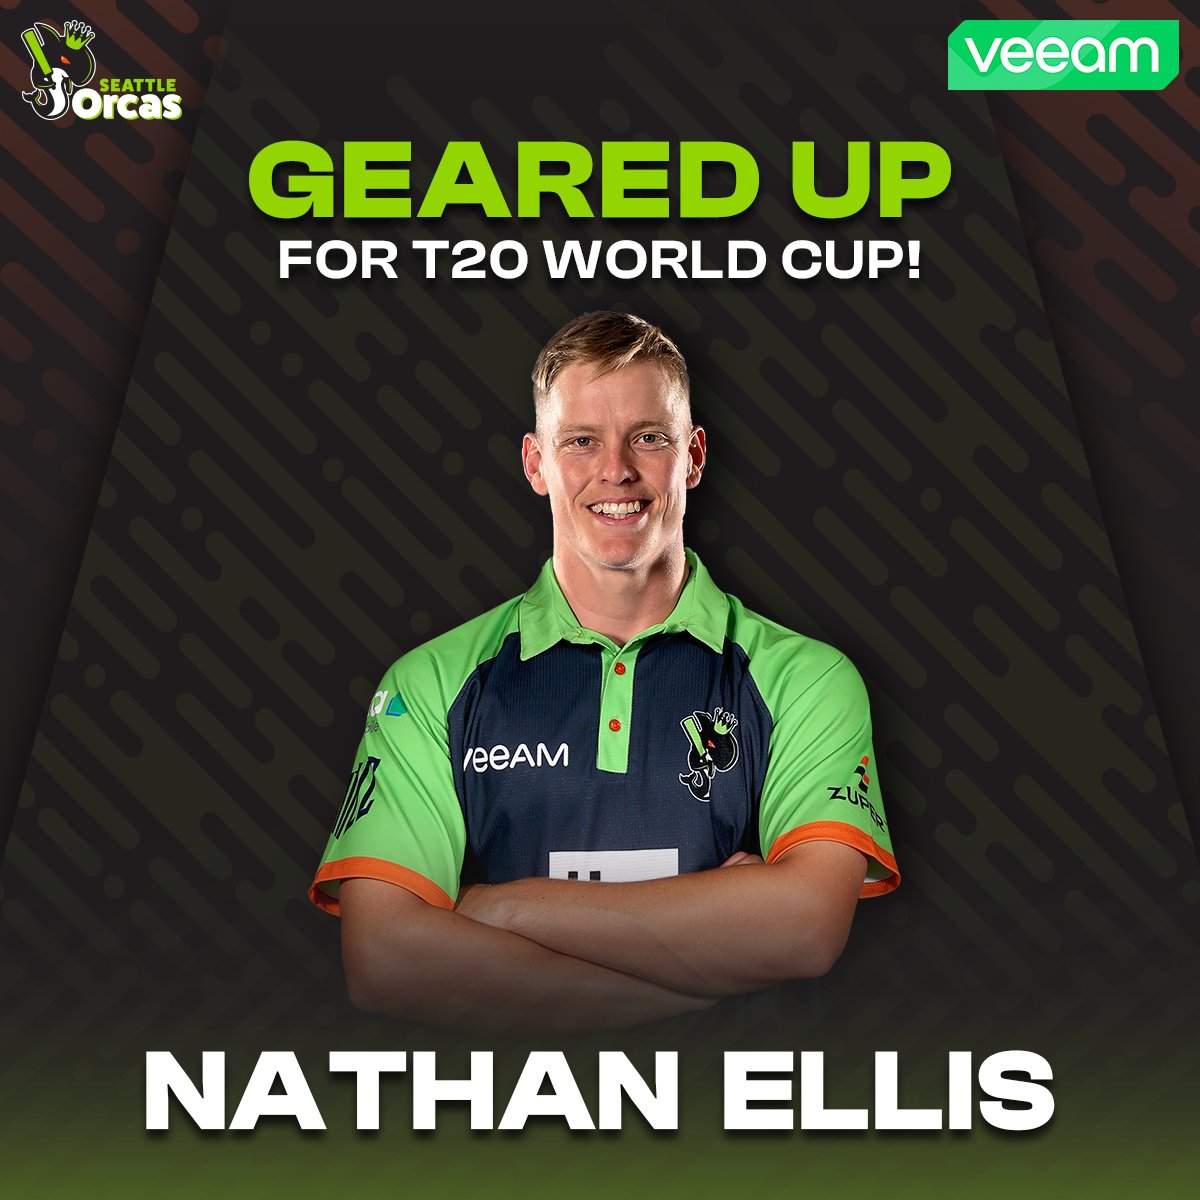 Nathan Ellis is ready for his next mission! 🚀 

Get ready to witness our Australian ⭐ in action in the 🇺🇸 & 🌴 during the ICC Men's #T20WorldCup! 😍 

#SeattleOrcas #MajorLeagueCricket #PodSquad #AmericasFavoriteCricketTeam #AFCT | @Veeam